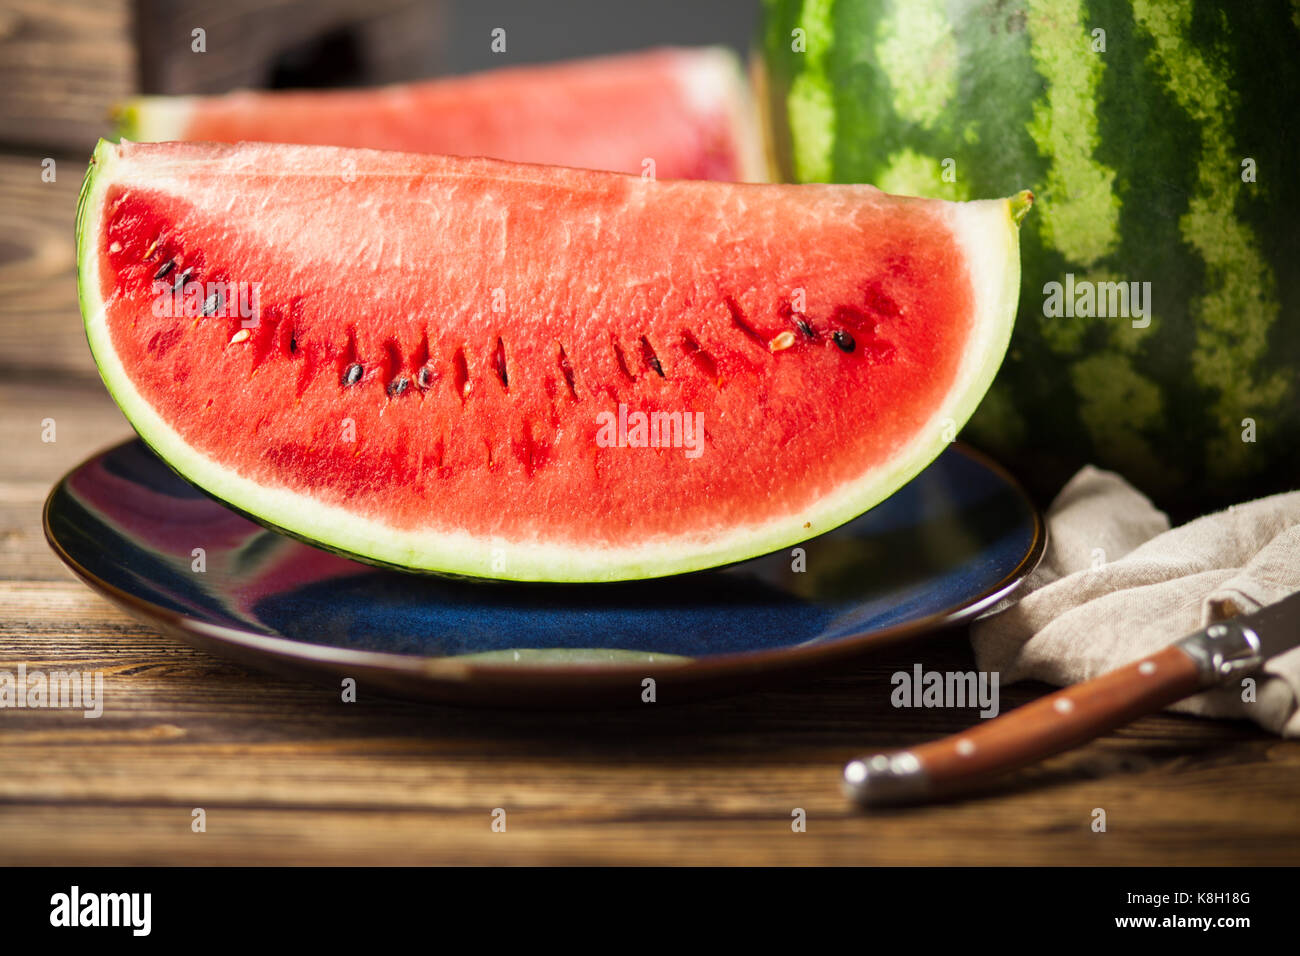 Ripe juicy watermelons on a wooden table Stock Photo